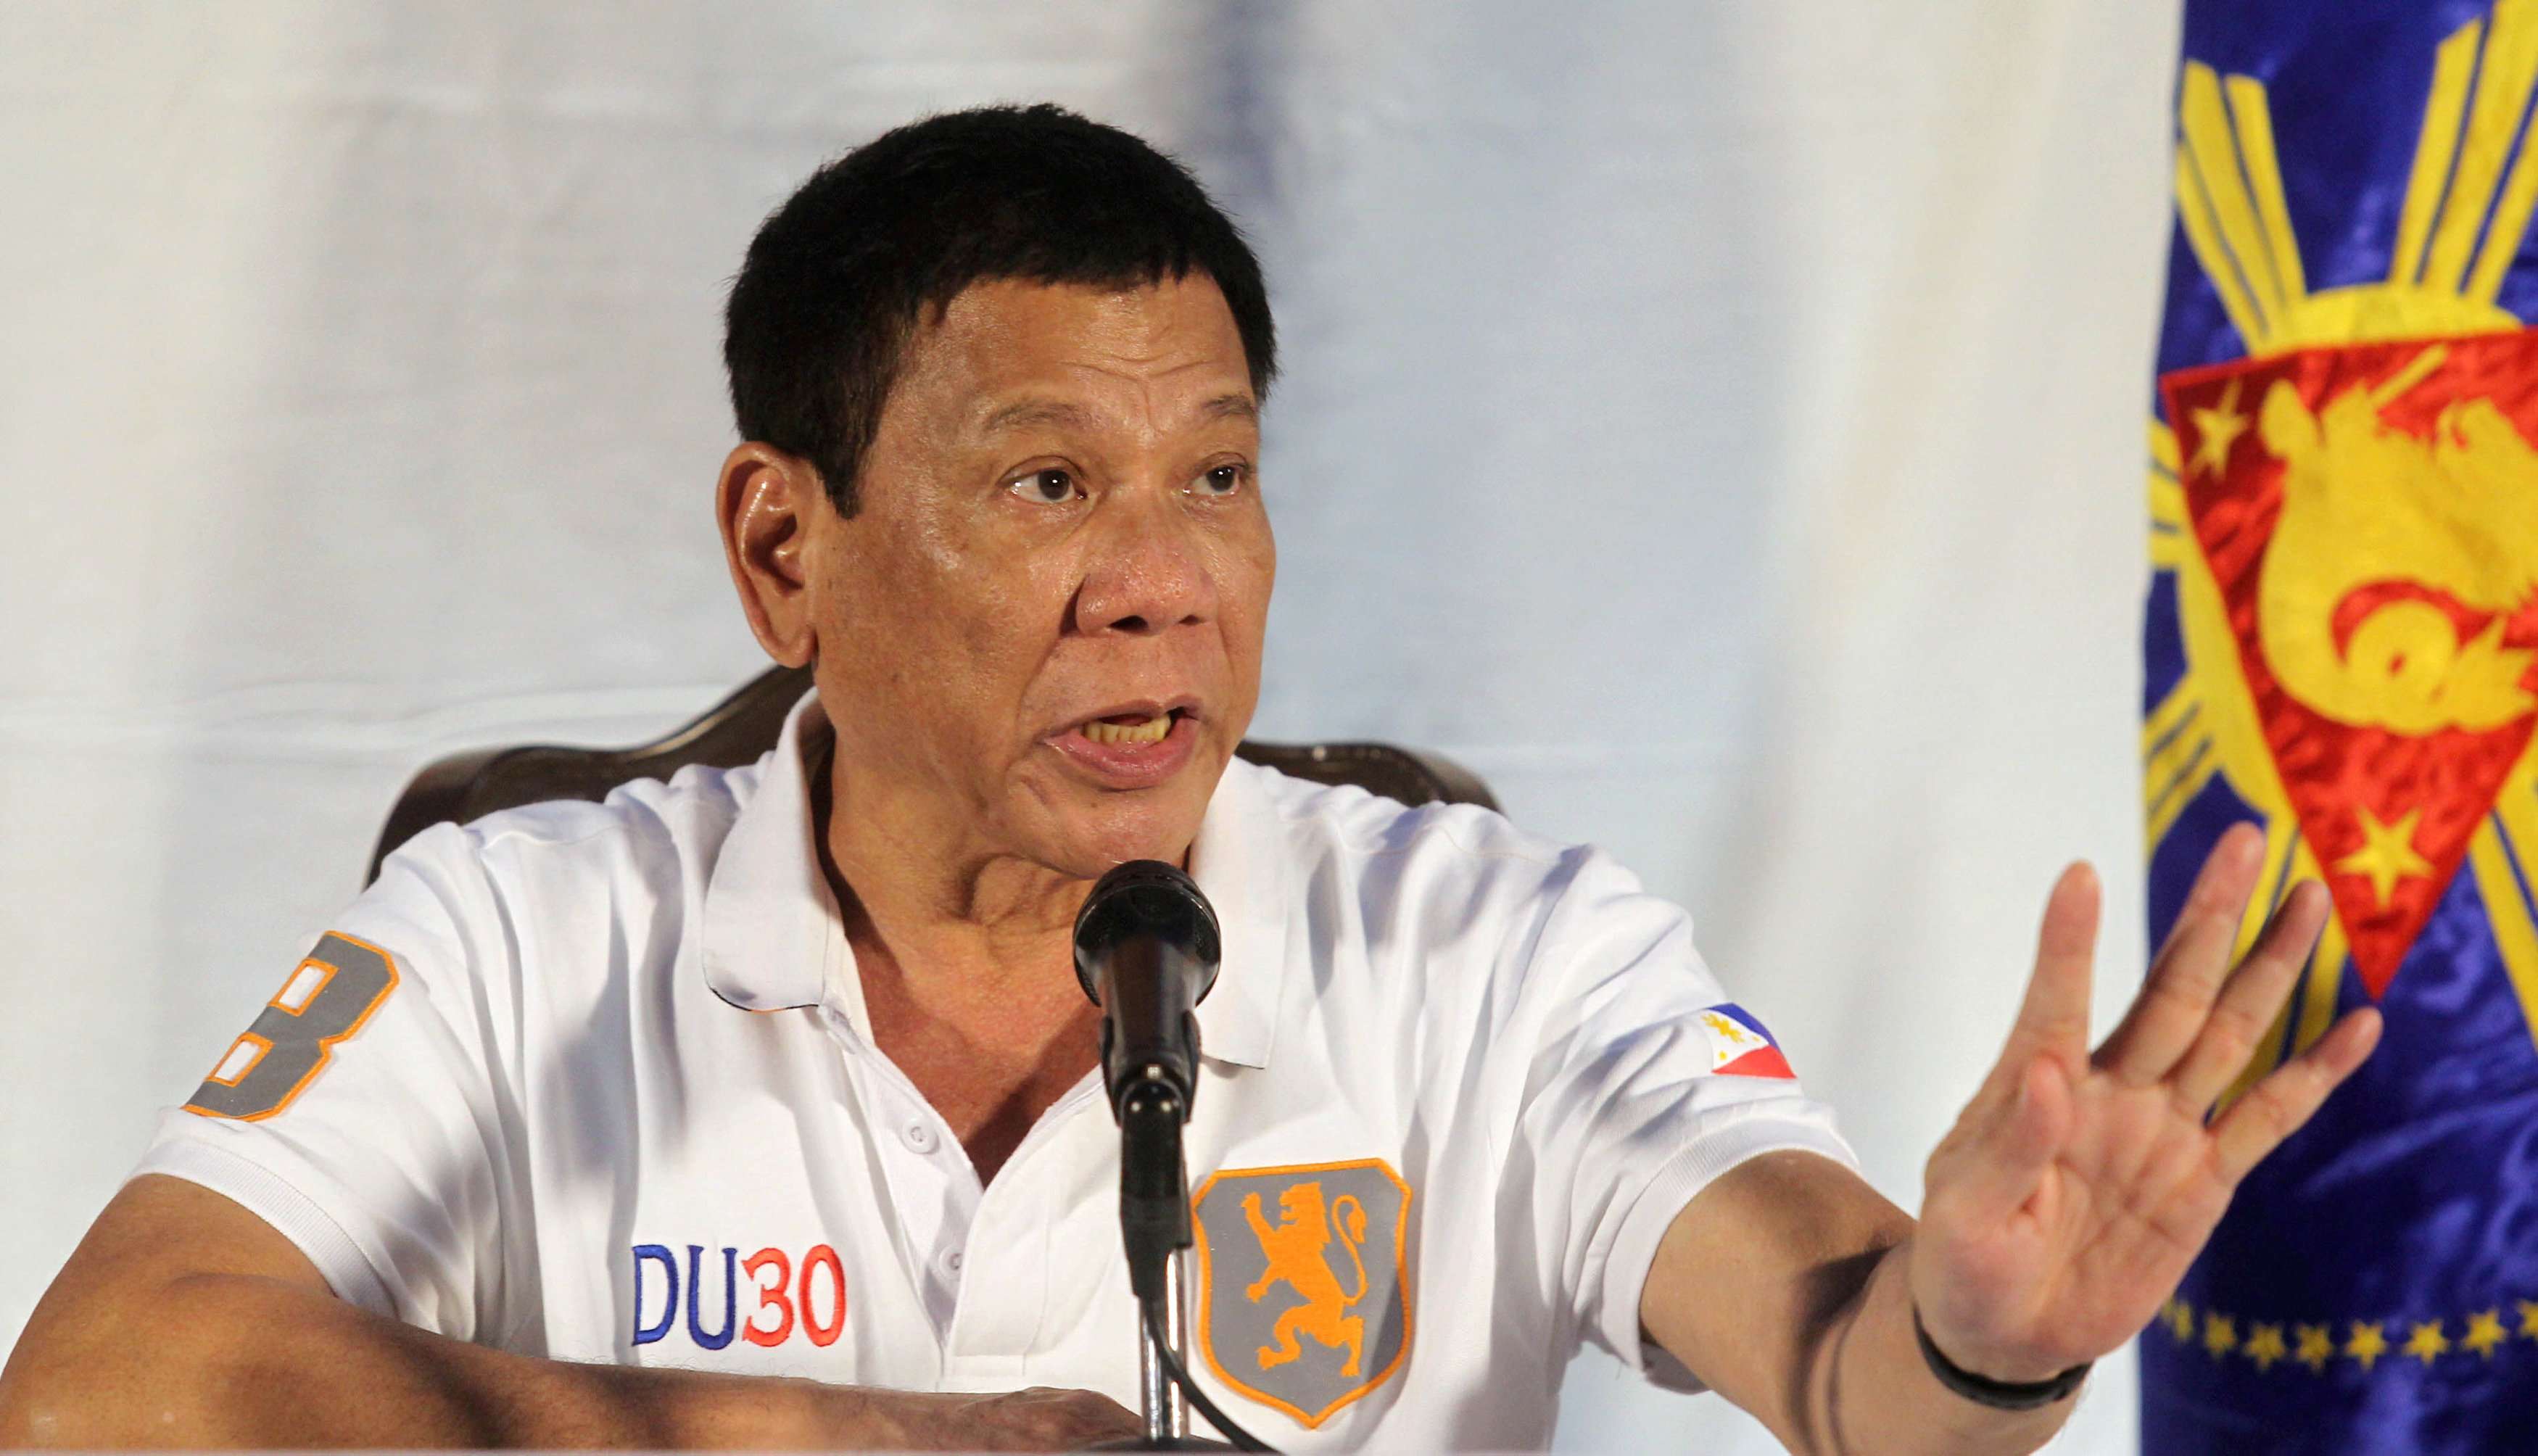 Philippine President Rodrigo Duterte has threatened that confrontation over disputed South China Sea islands would be “bloody”. Photo: Reuters